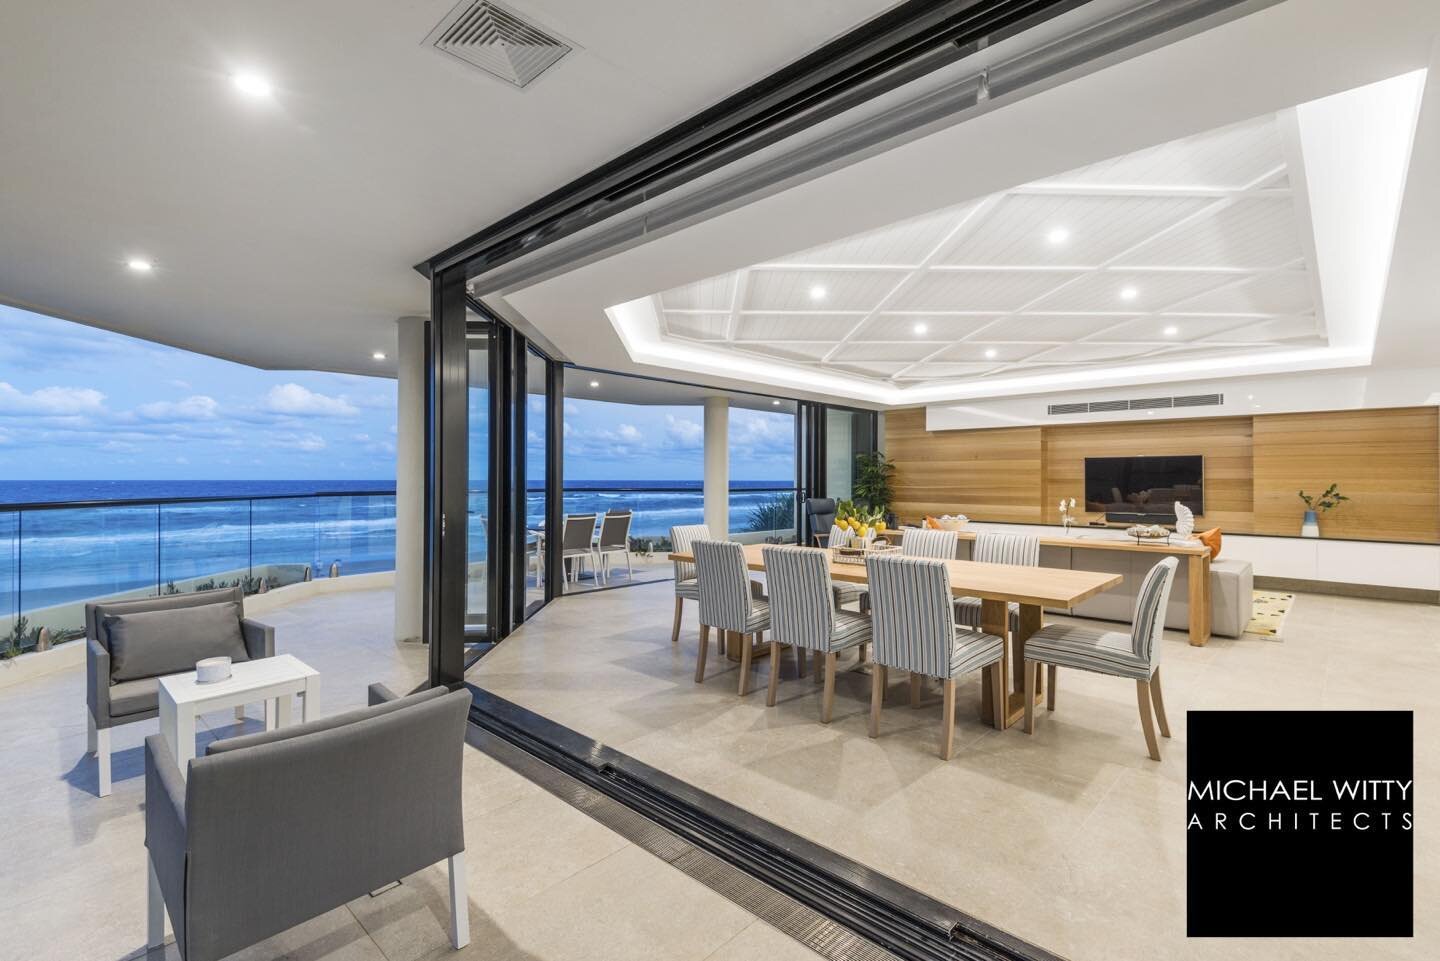 One of our oceanfront apartment alterations - a complete upgrade involving a new open plan contemporary layout requiring removal of all exterior walls to maximise the beachfront views, enlarging the bedrooms, raising the ceilings, incorporating new e